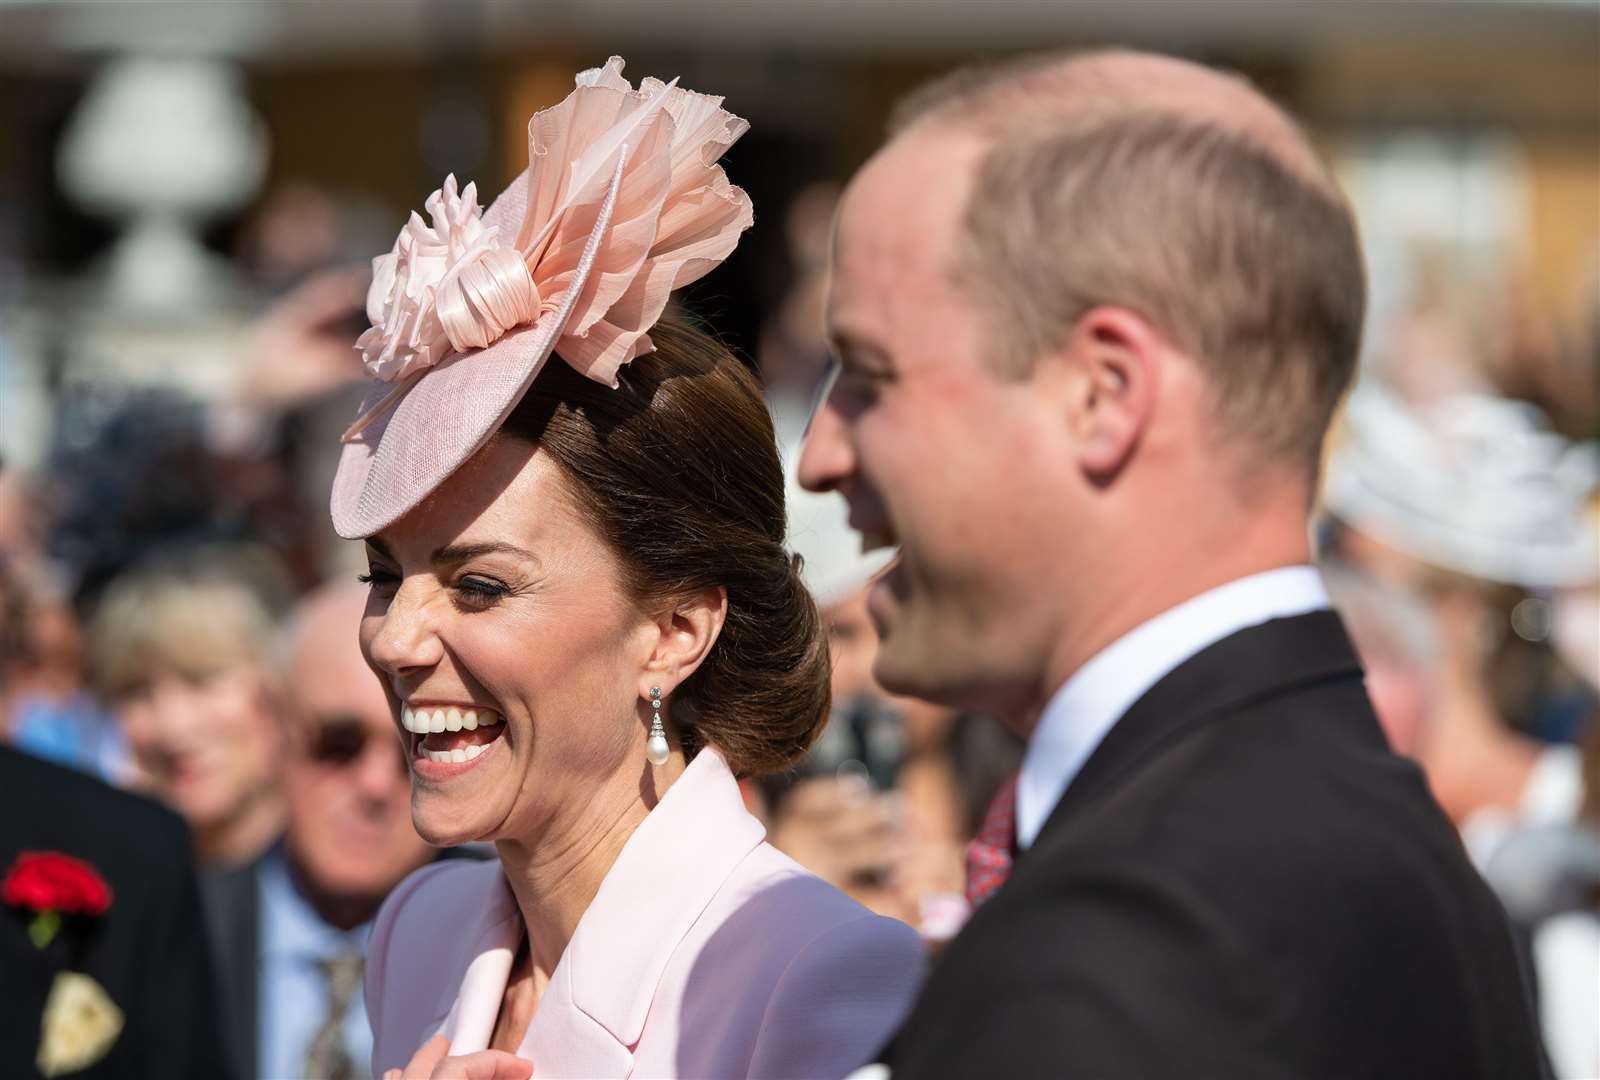 The Duke and Duchess of Cambridge have also attended garden parties (Dominic Lipinski/PA)